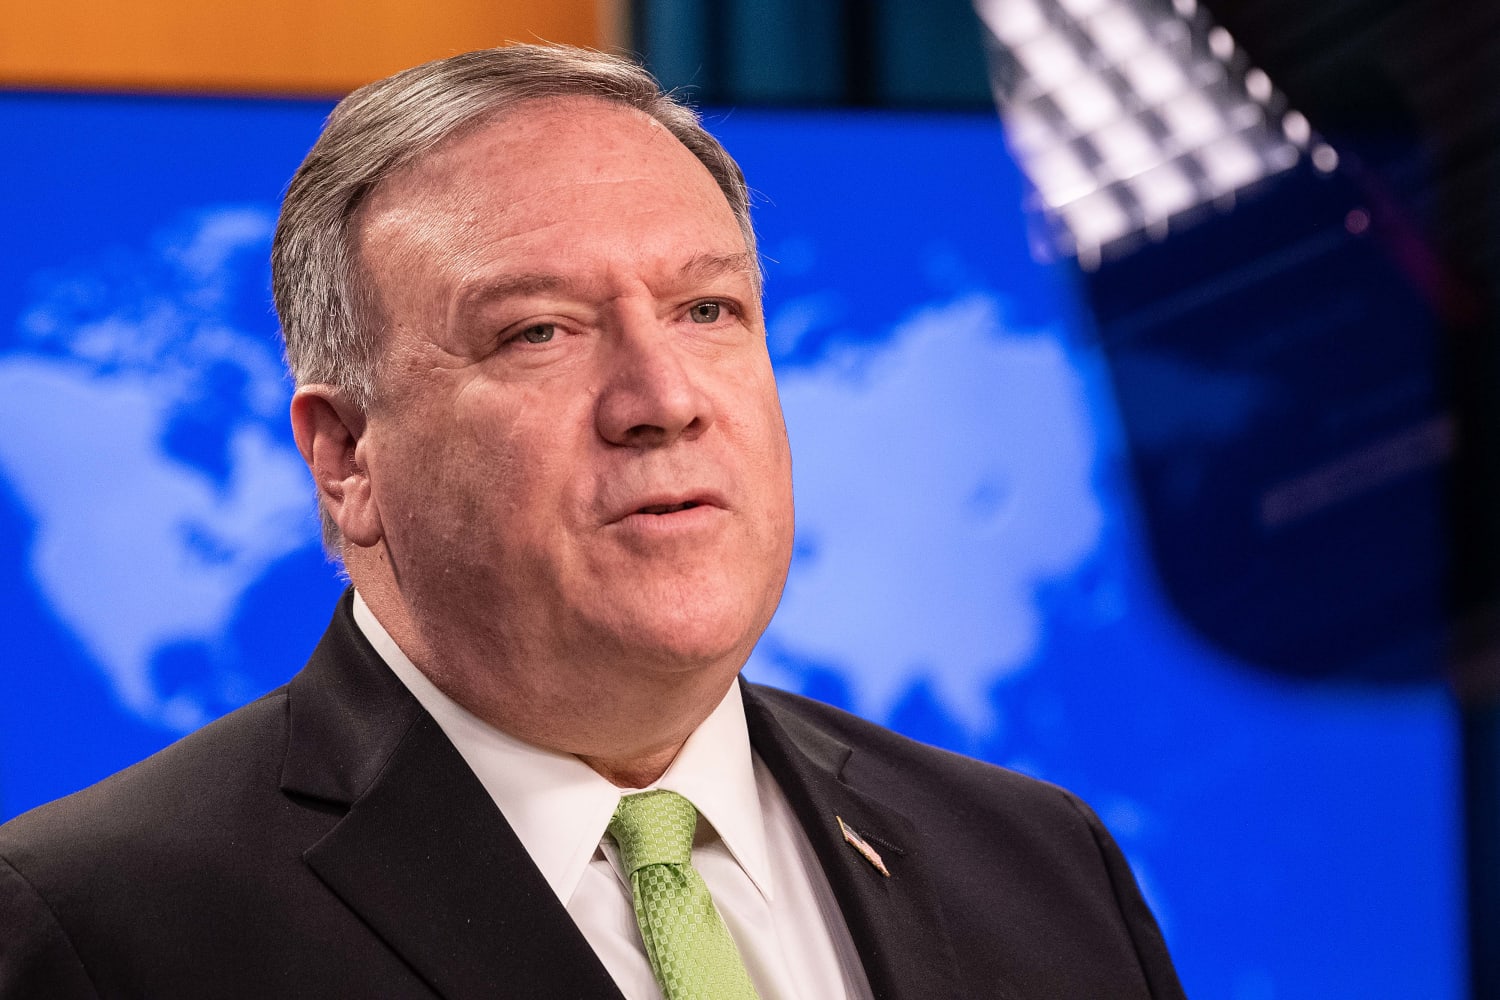 Pompeo declares that Hong Kong is no longer autonomous from China, threatening trade with U.S.